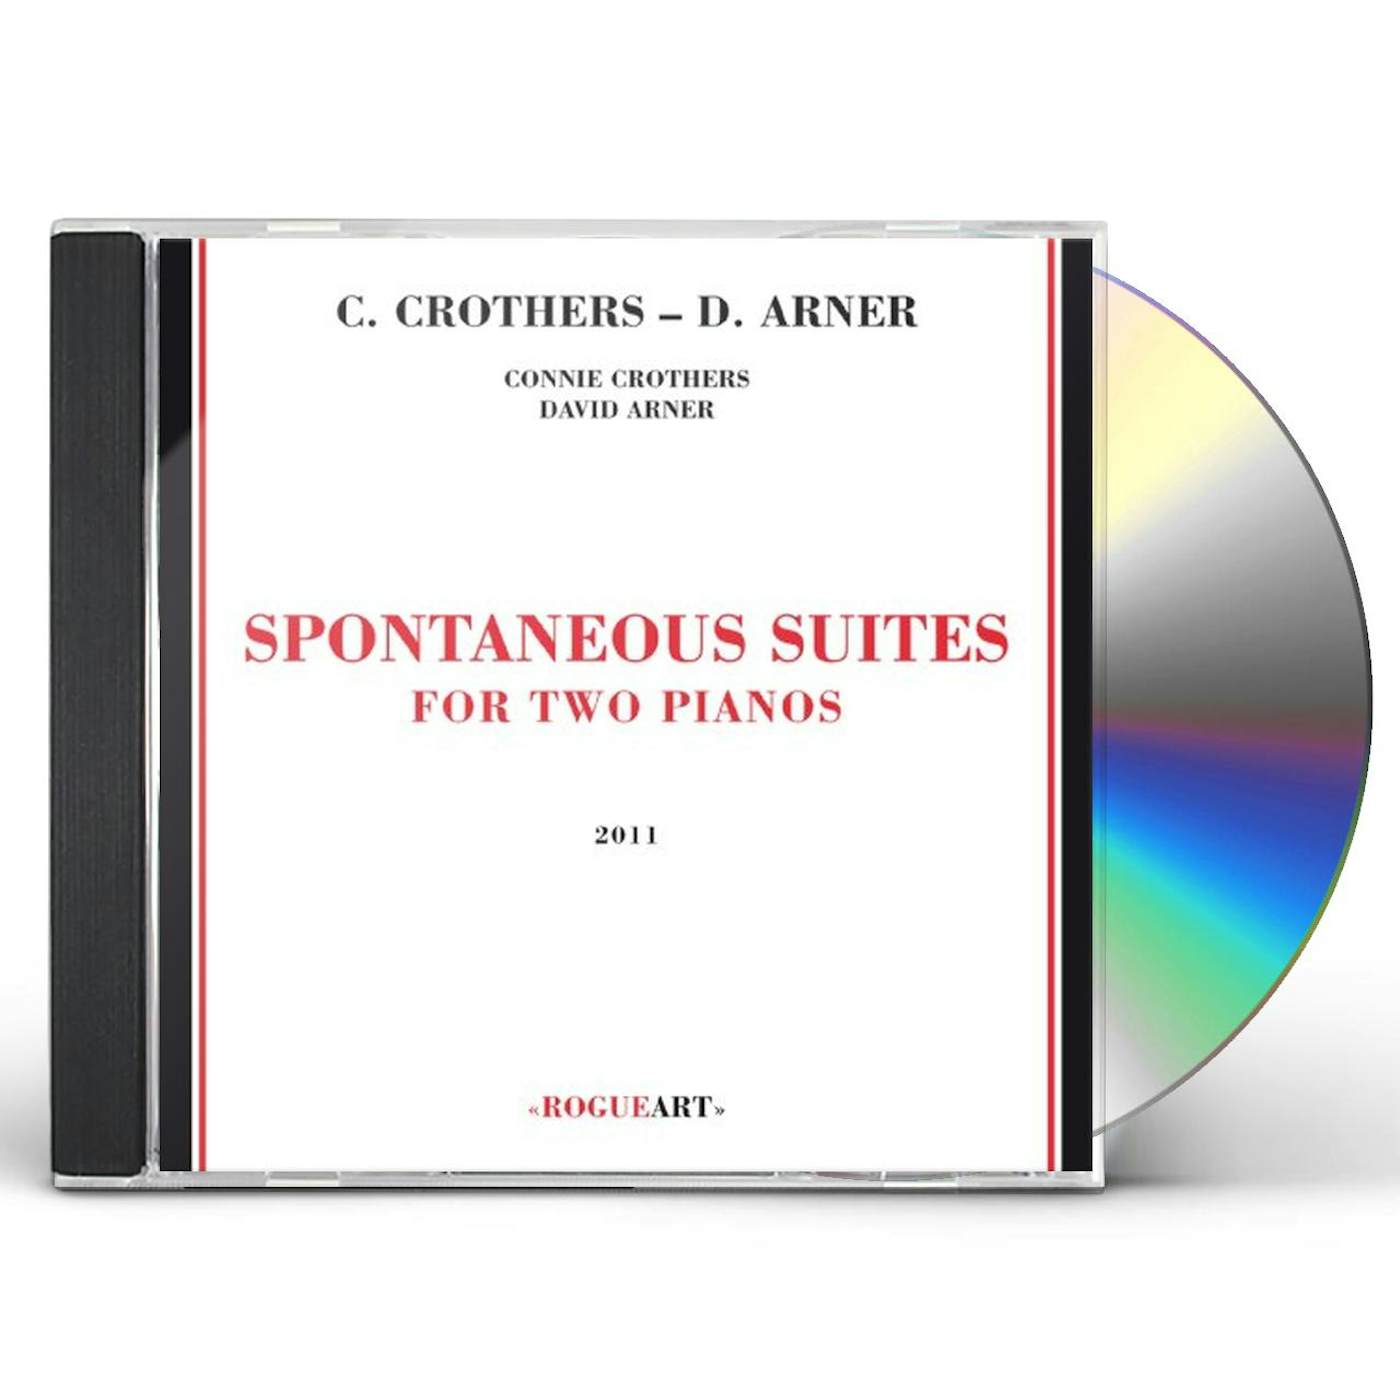 Connie Crothers SPONTANEOUS SUITES FOR TWO PIANOS CD